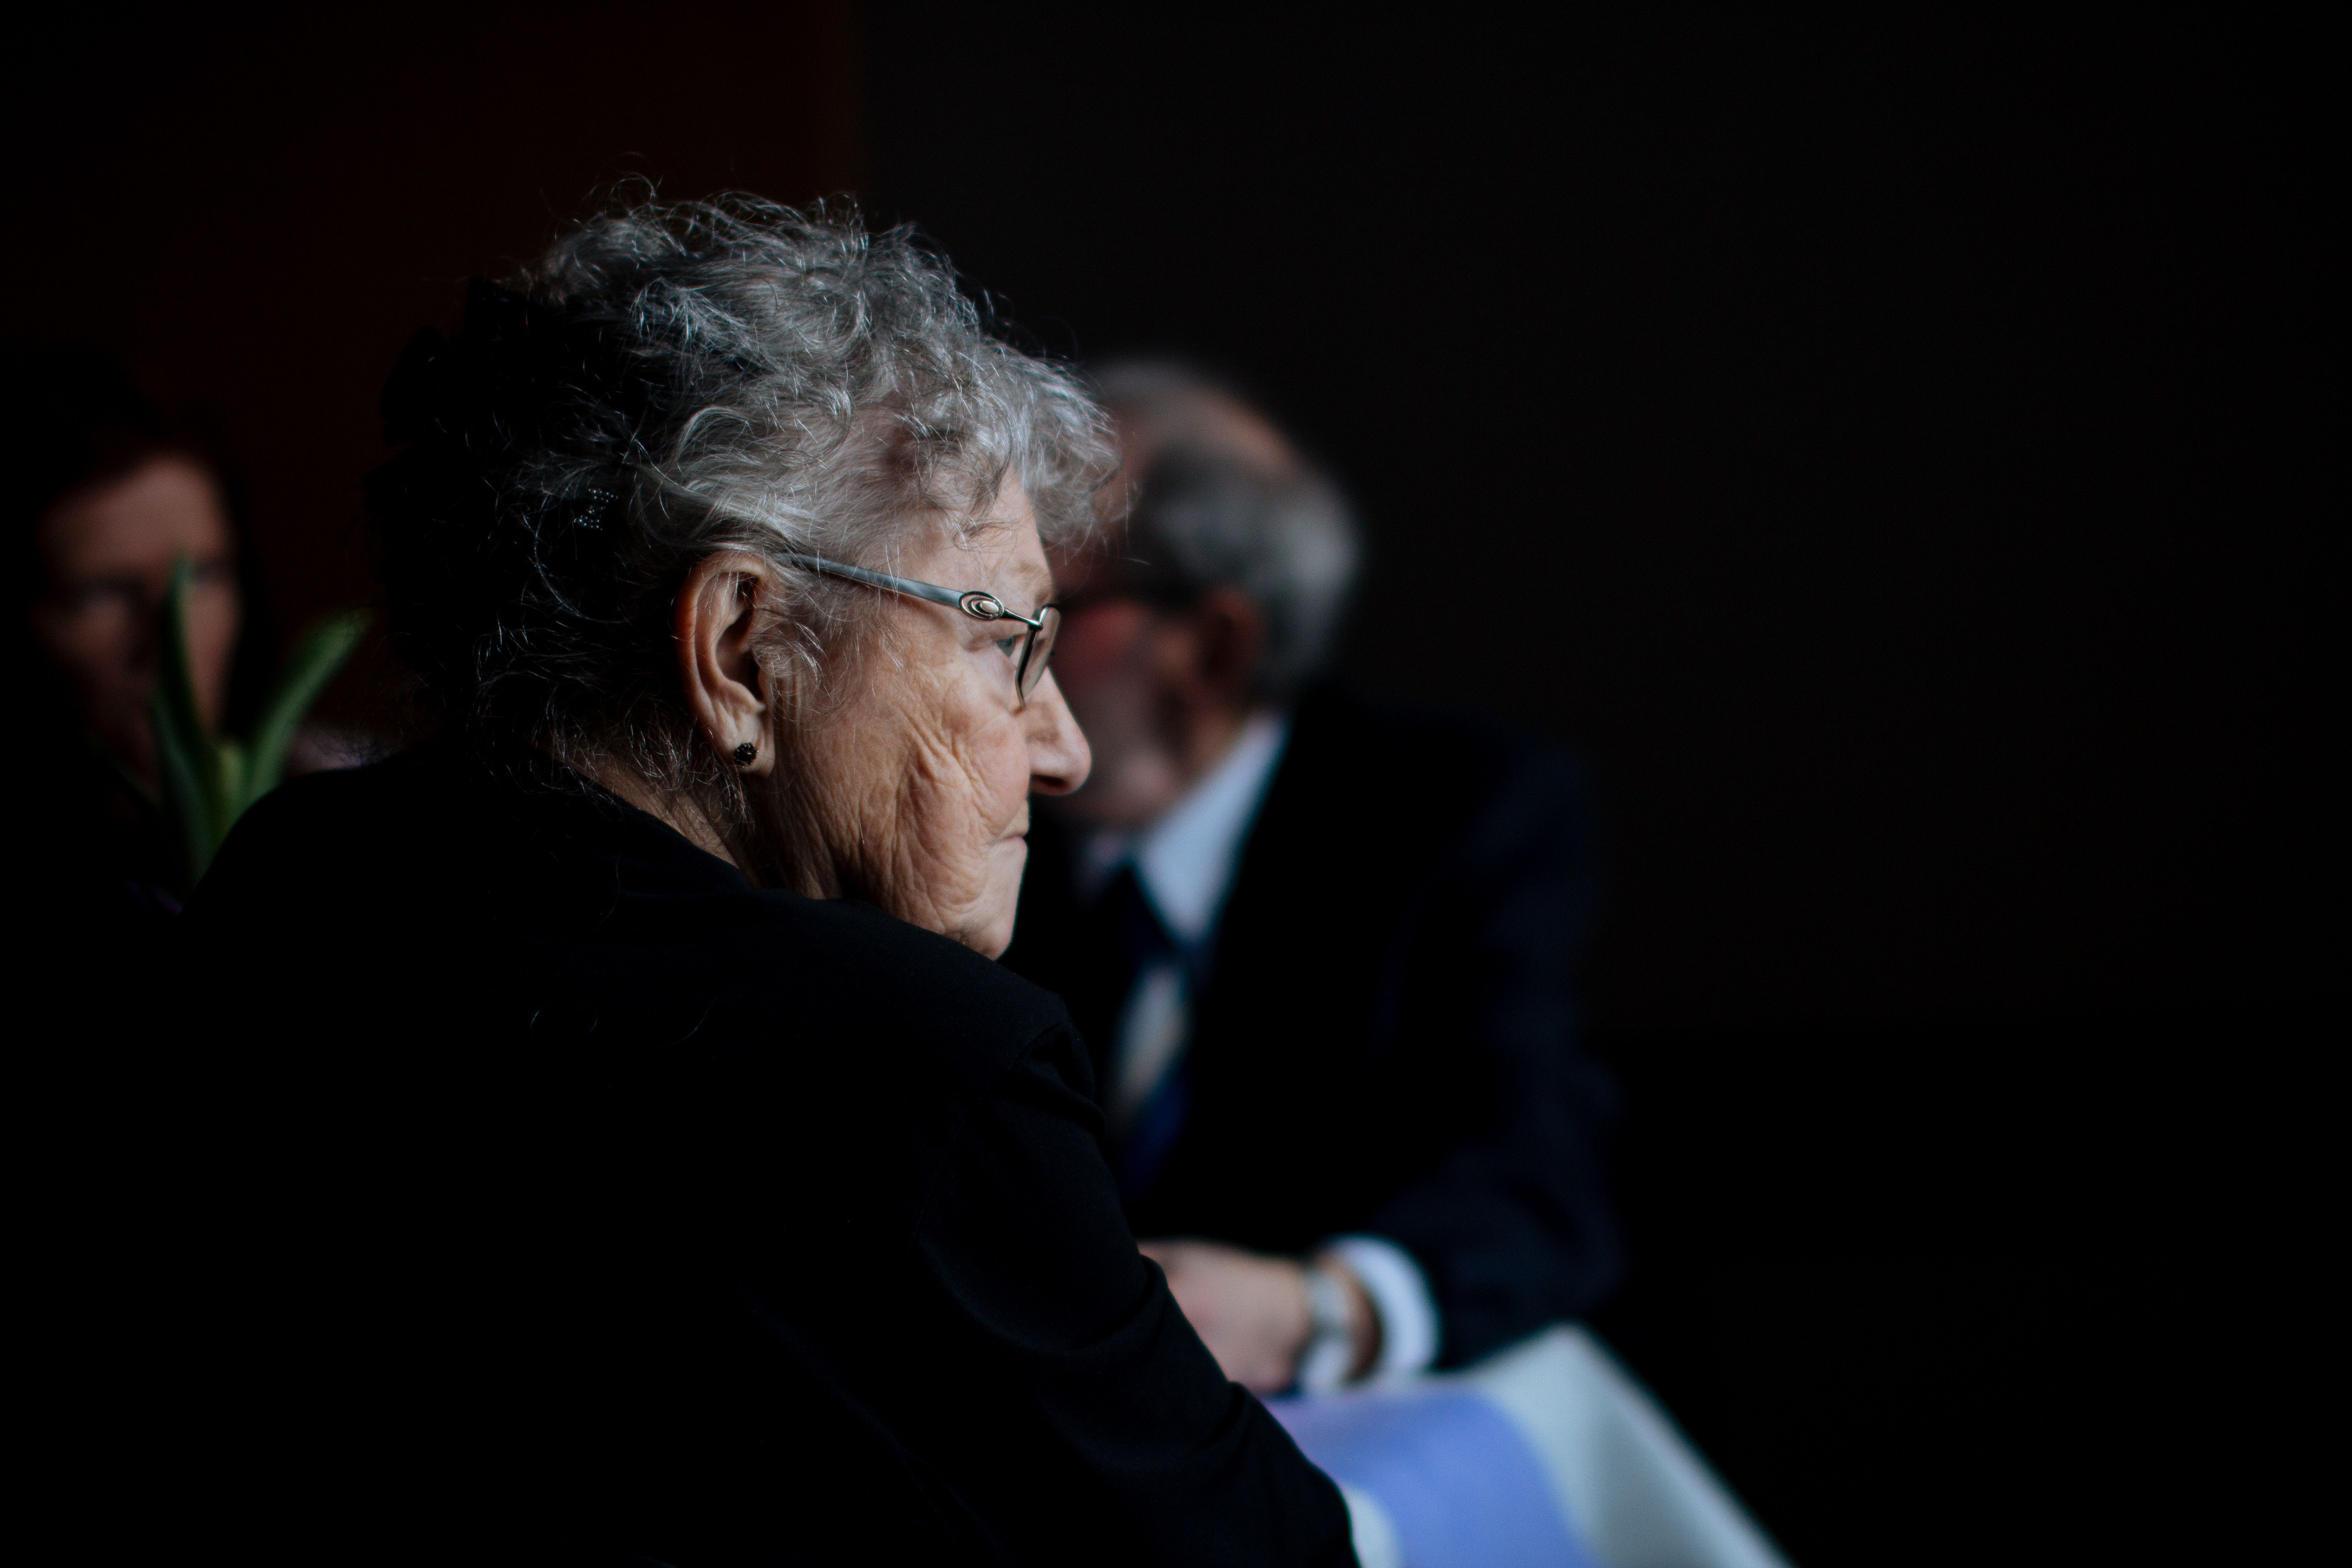 5472x3648 #grey hair, #profile, #senior, #person, #glasses, #portrait, #lady, #experience, #woman, #adult, #old, #spectacles, #old age, #elderly, #old person, #meeting, #gray hair, #PNG image, #face, #grandma, #dark. Mocah.org HD Wallpaper